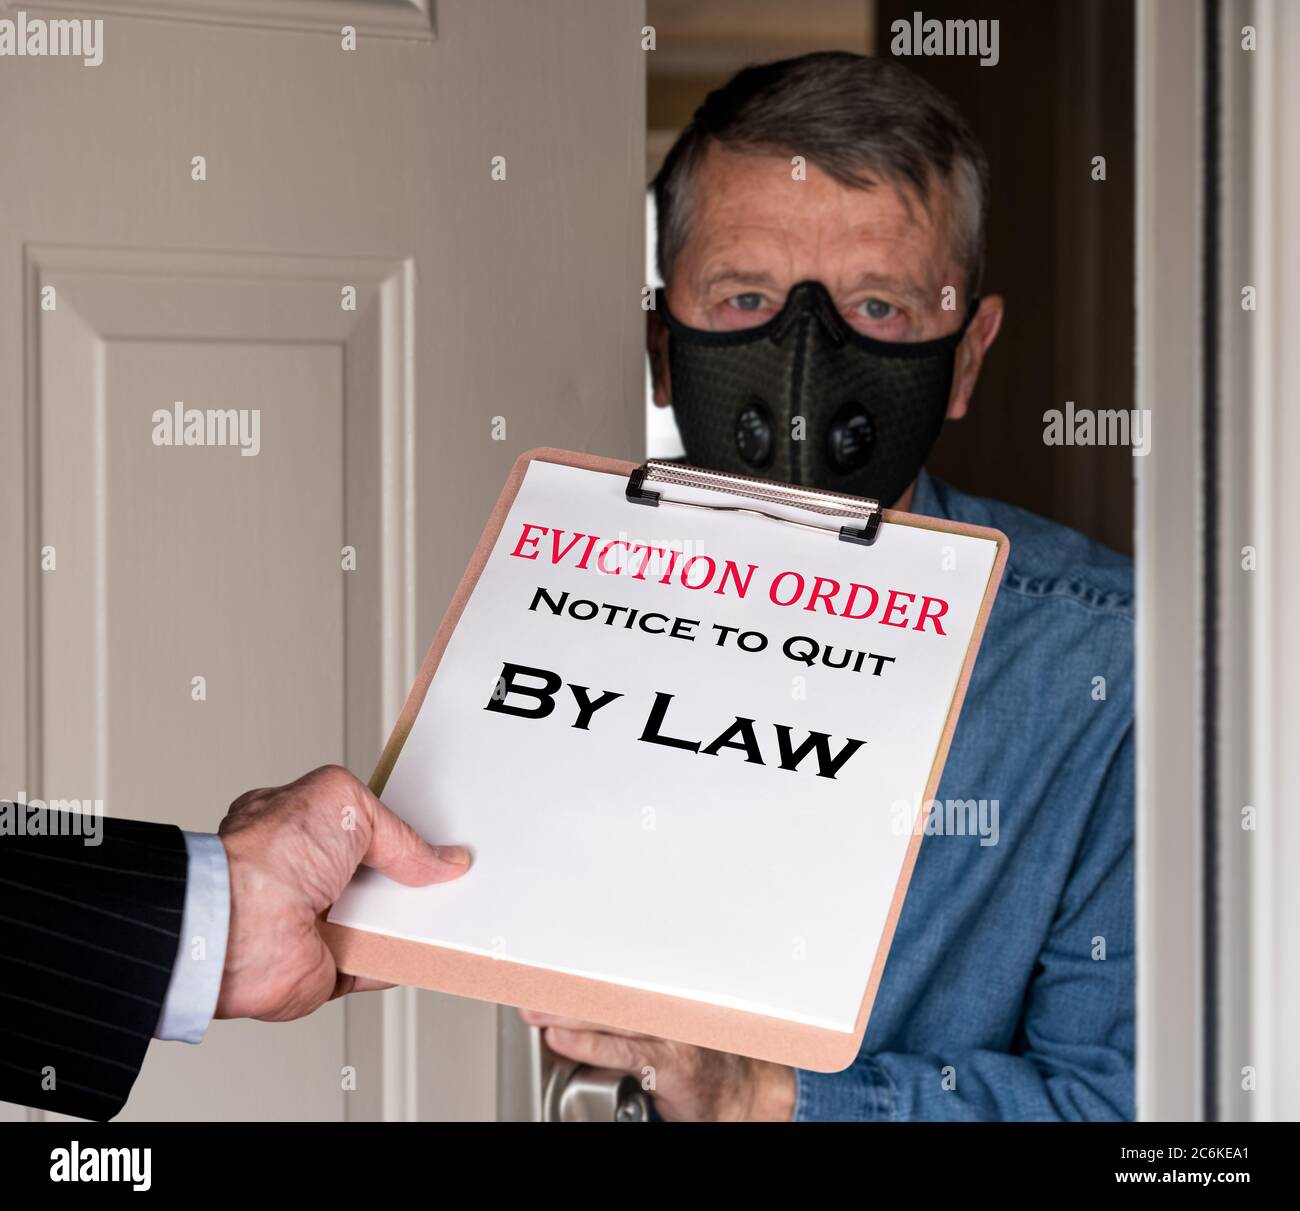 Open front door with man in suit handing an eviction notice to a defaulting renter with face mask during coronavirus epidemic Stock Photo